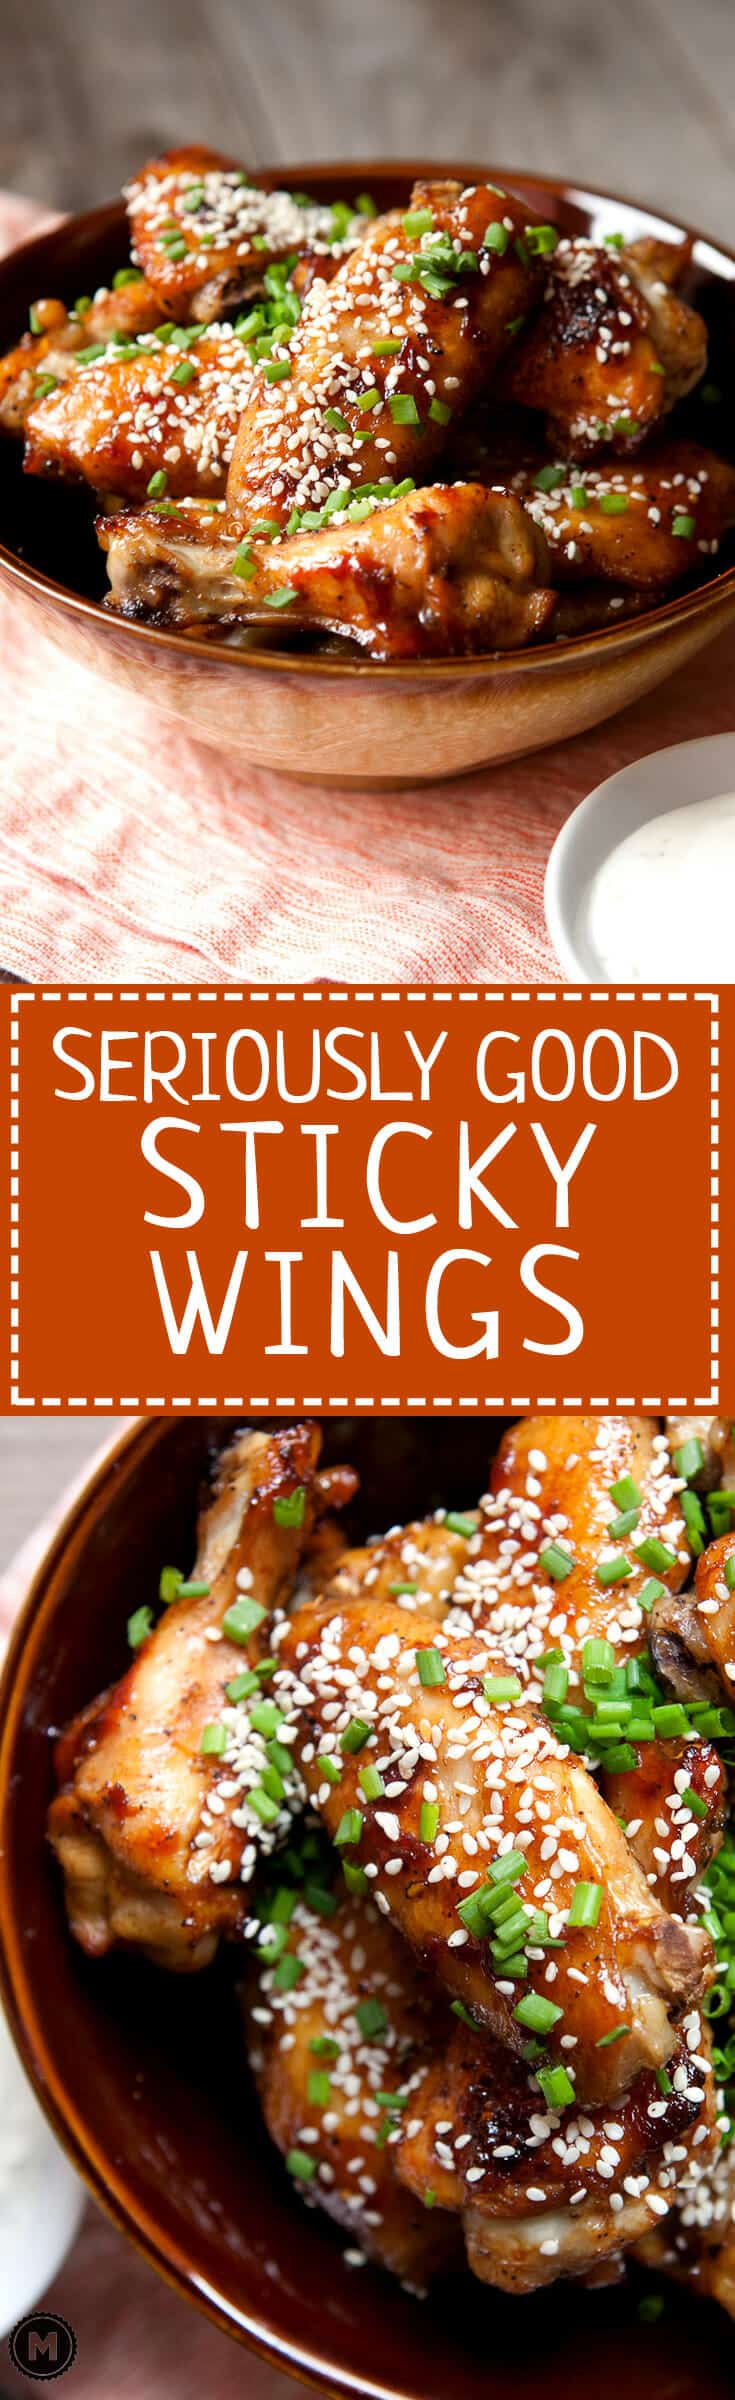 Spicy Sticky Chicken Wings: Glazed with a soy sauce, hoisin, and chili garlic glaze, these baked wings are so addictive. You won't want to share the bowl! | macheesmo.com